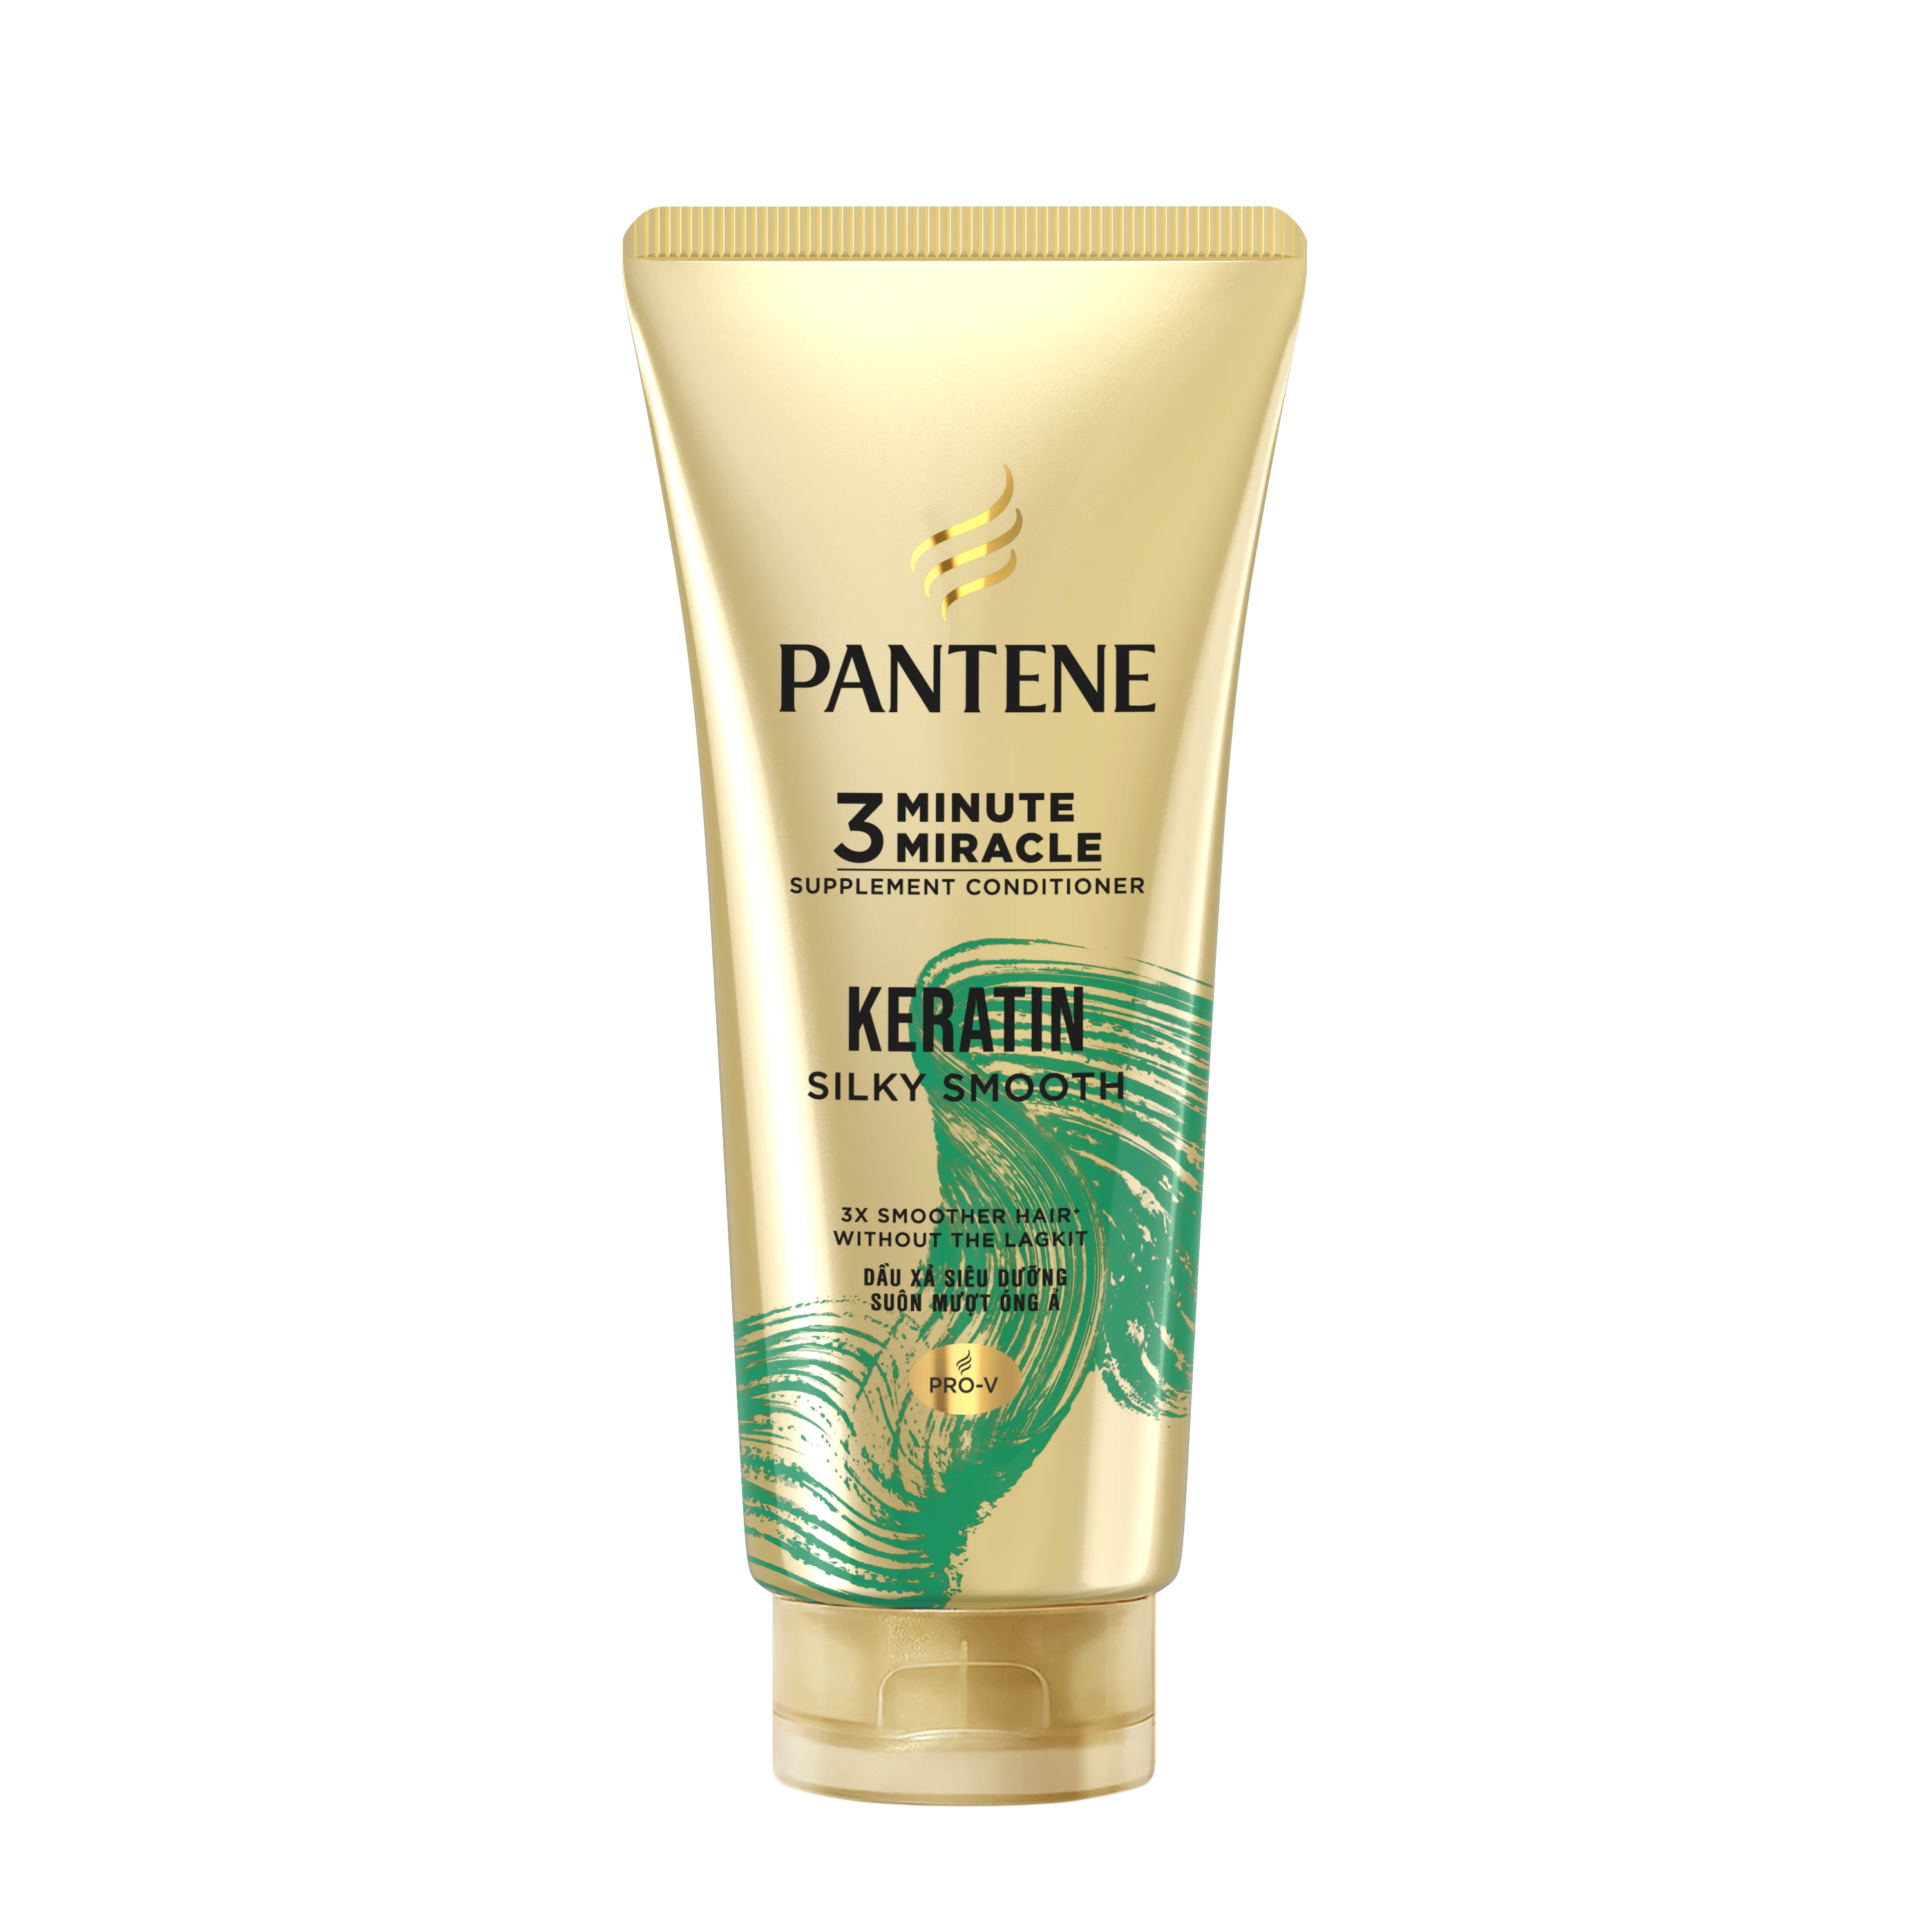 PANTENE KERATIN SILKY SMOOTH SUPPLEMENT CONDITIONER